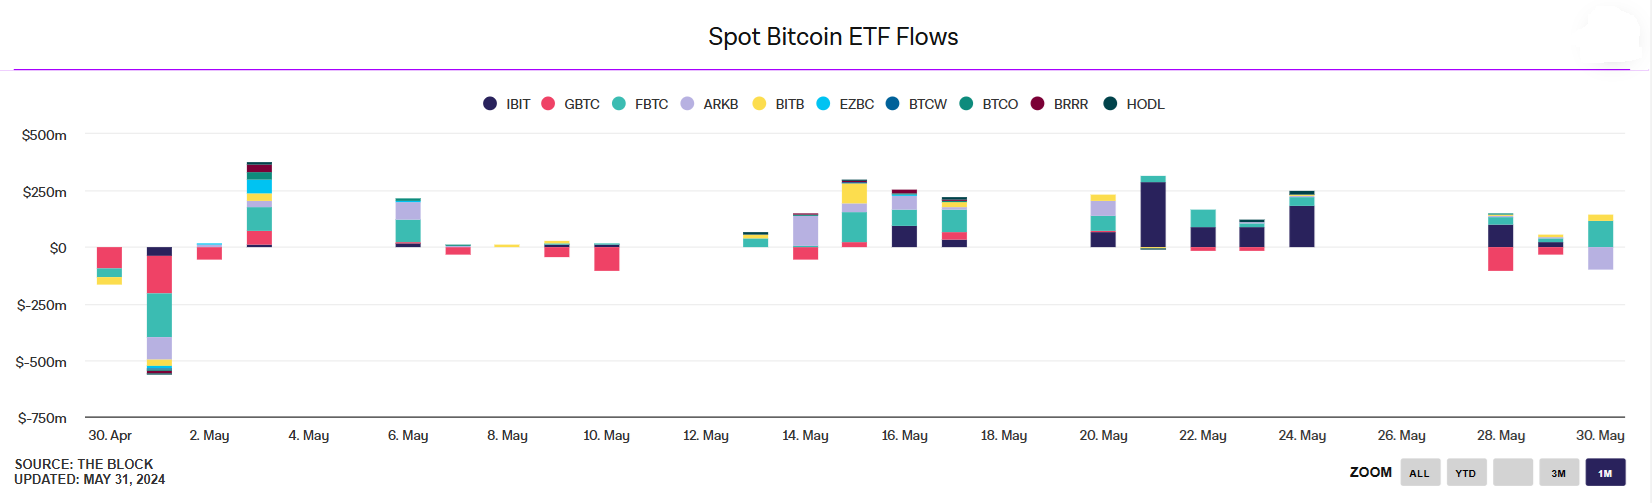 Market research report: Bitcoin hovers around 68k; supply headwinds offset ETF inflows - btc inflows